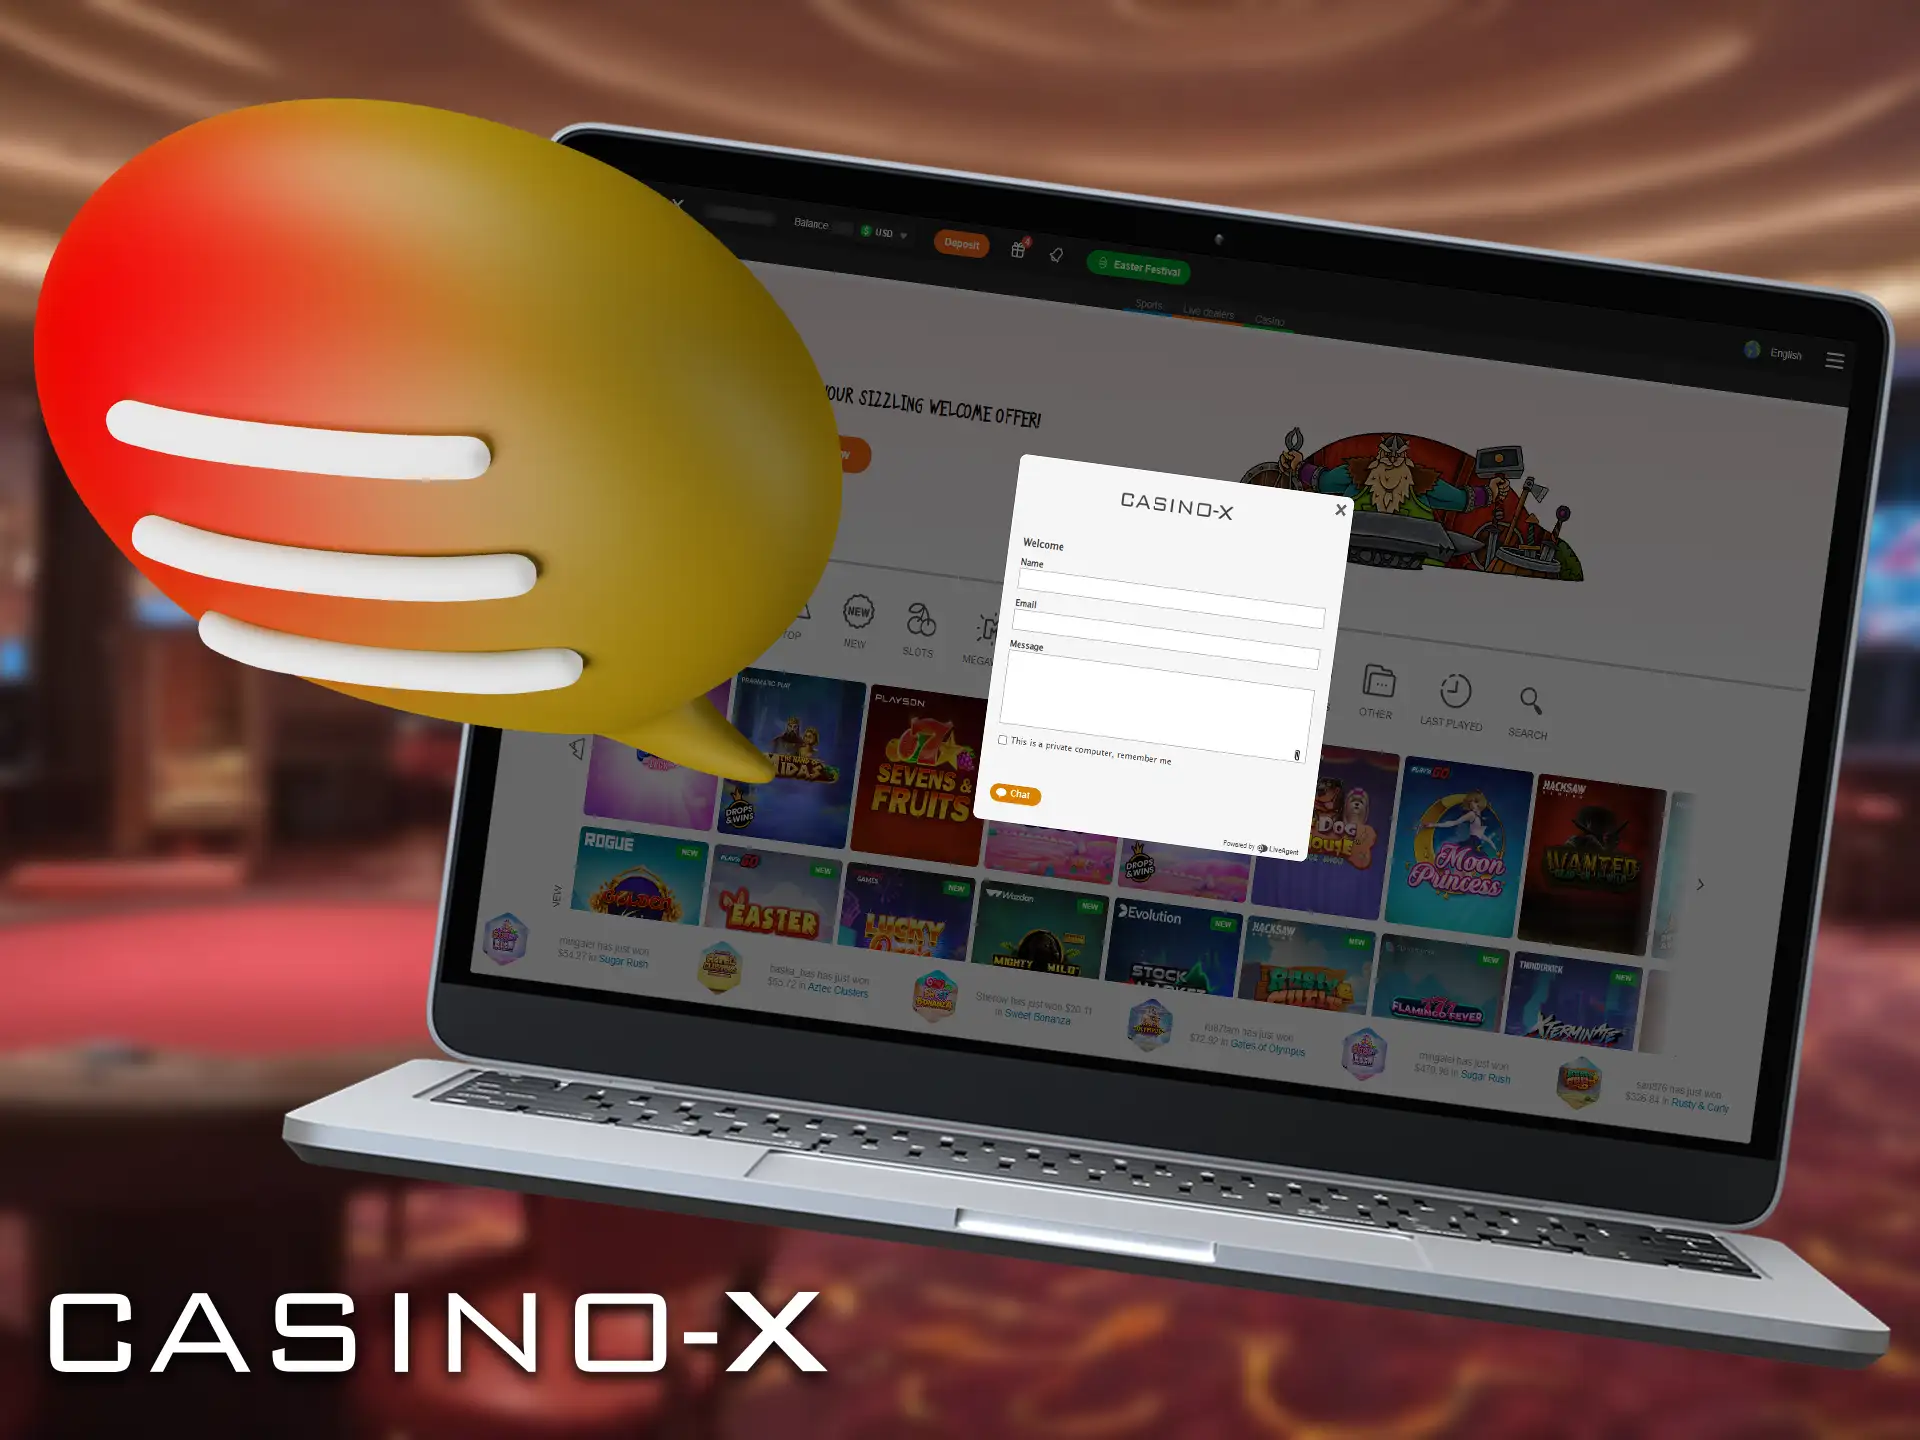 Casino-X prioritizes providing players with prompt and helpful support.